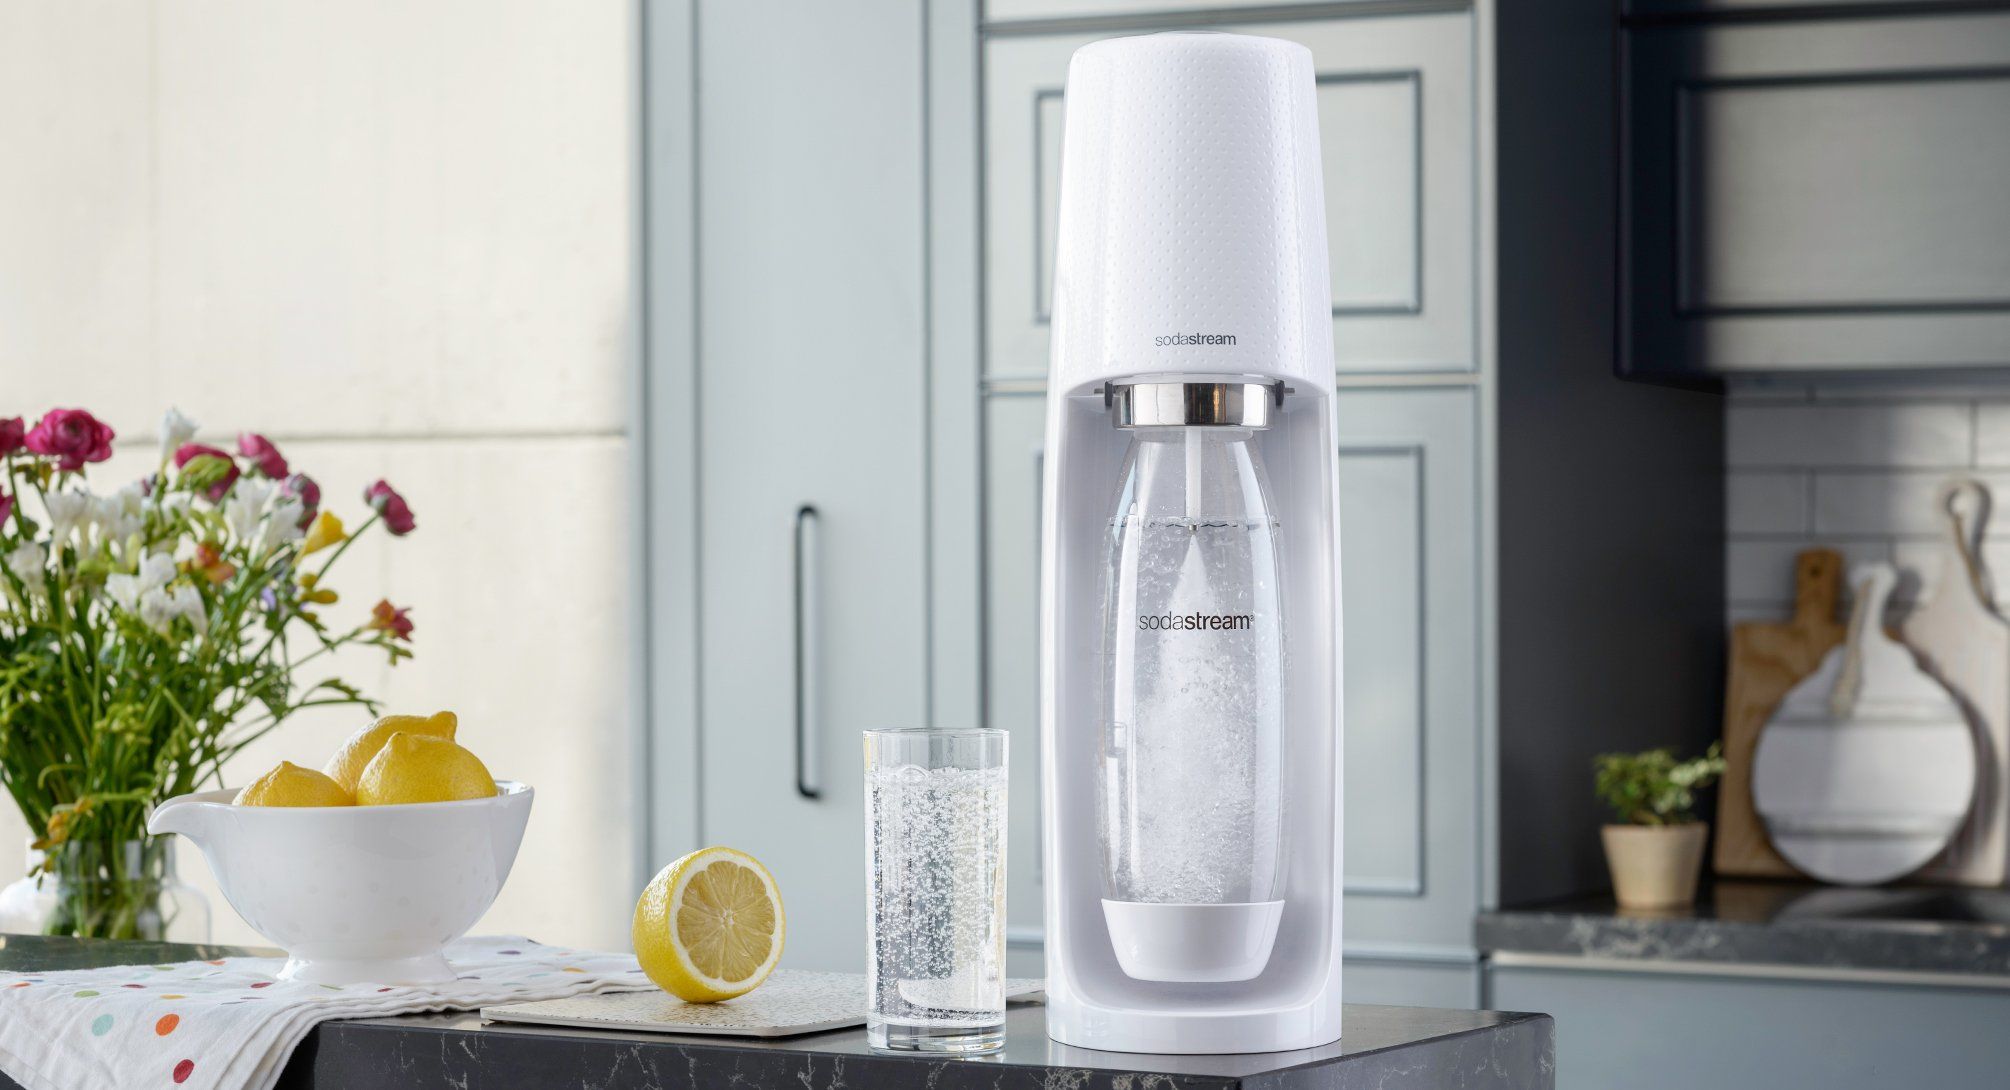 SodaStream About Us